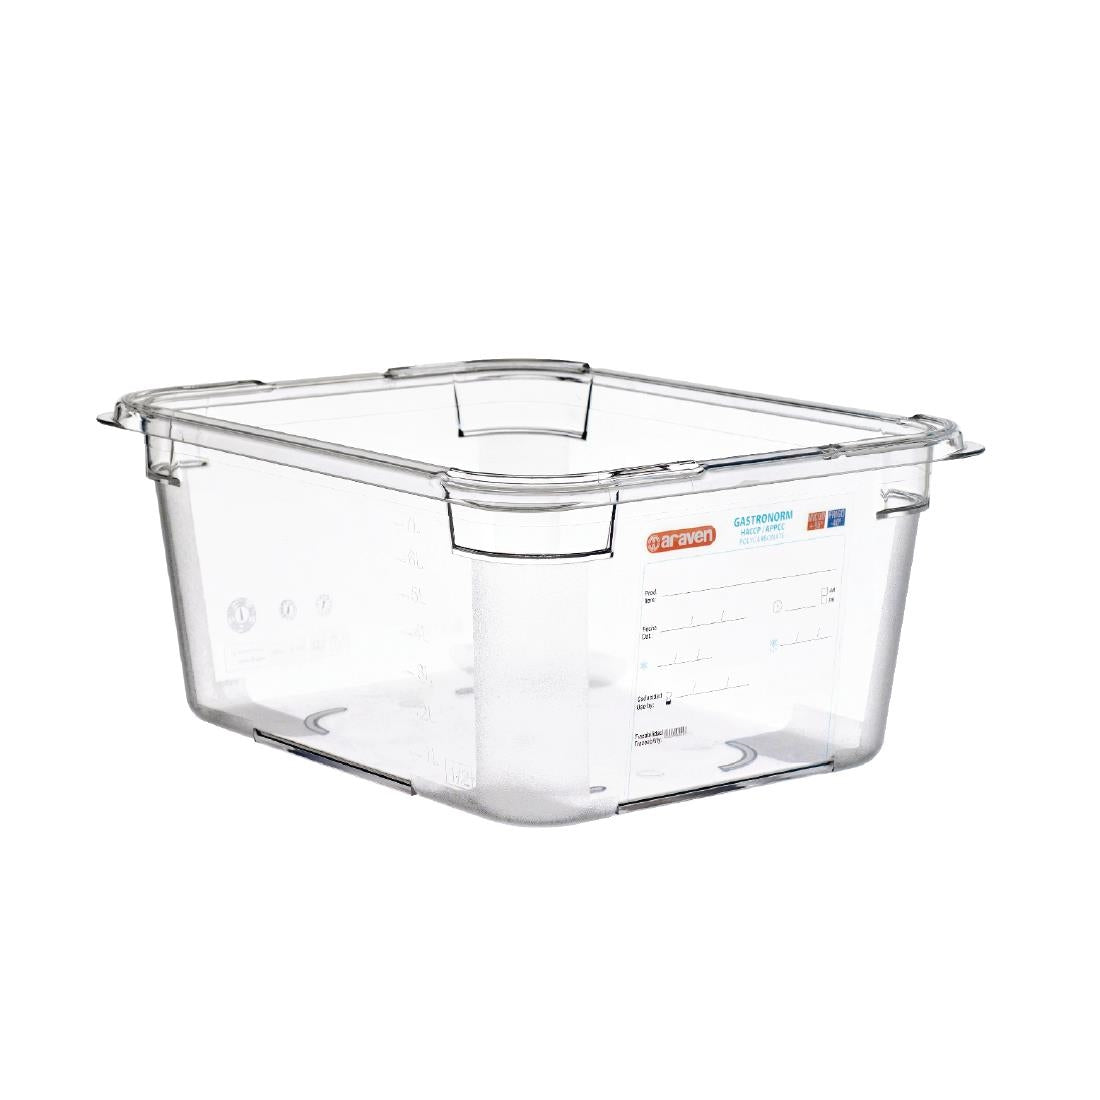 GD817 Araven Polycarbonate 1/2 Gastronorm Container 9.5Ltr JD Catering Equipment Solutions Ltd